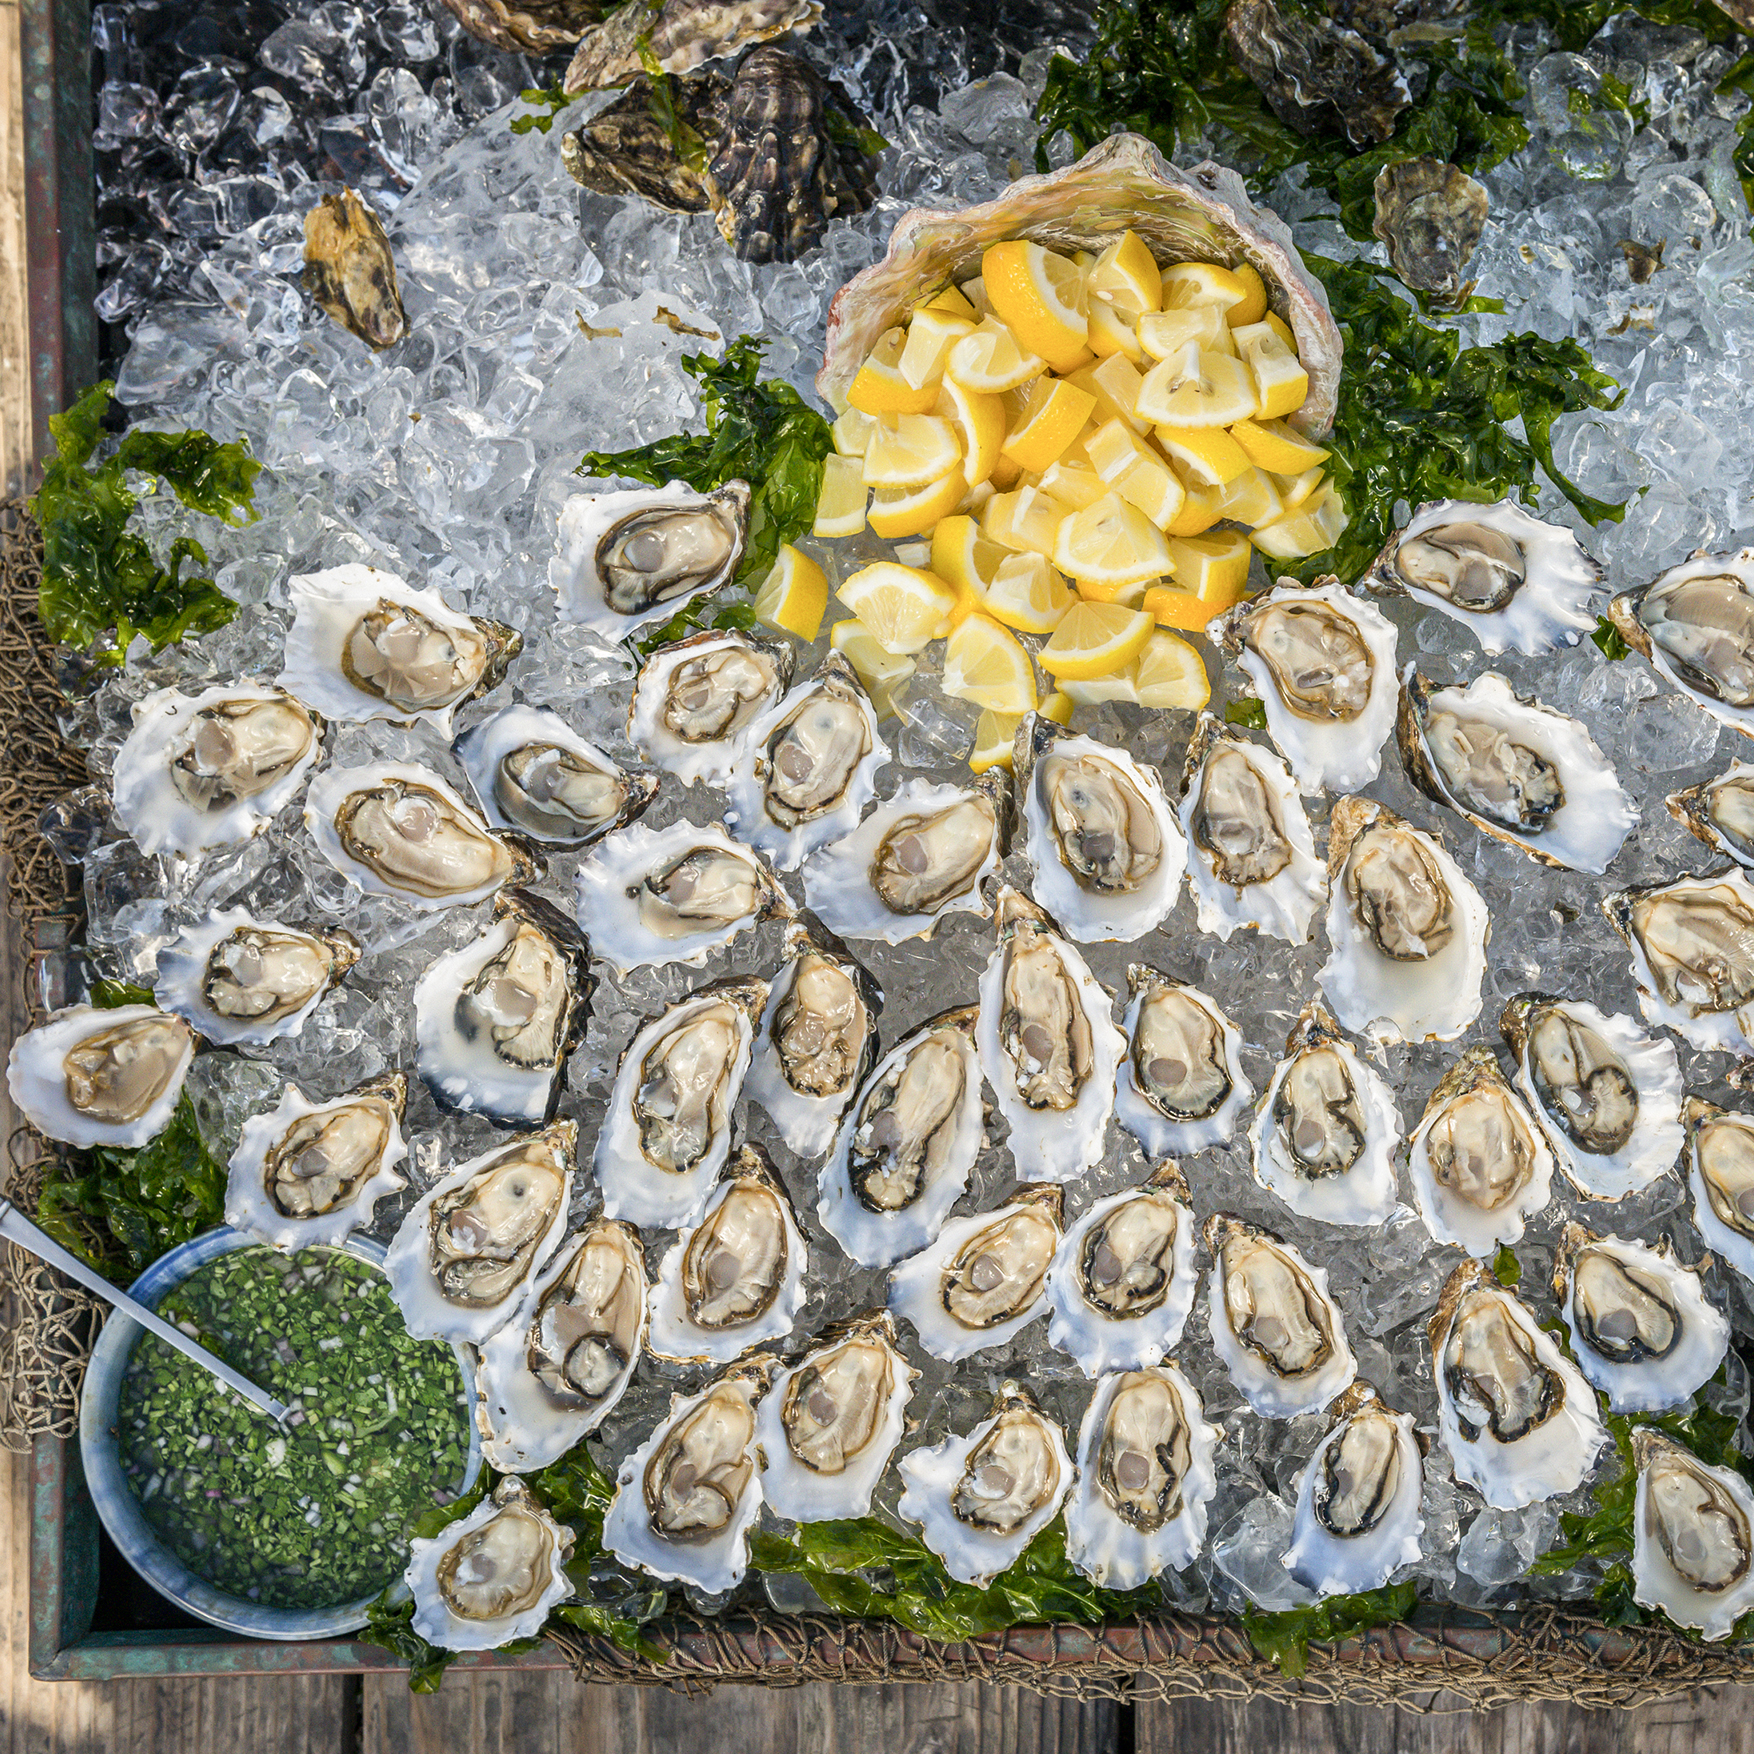 Hog Island Catering and Traveling Oyster Bars - Hog Island Oyster Co.